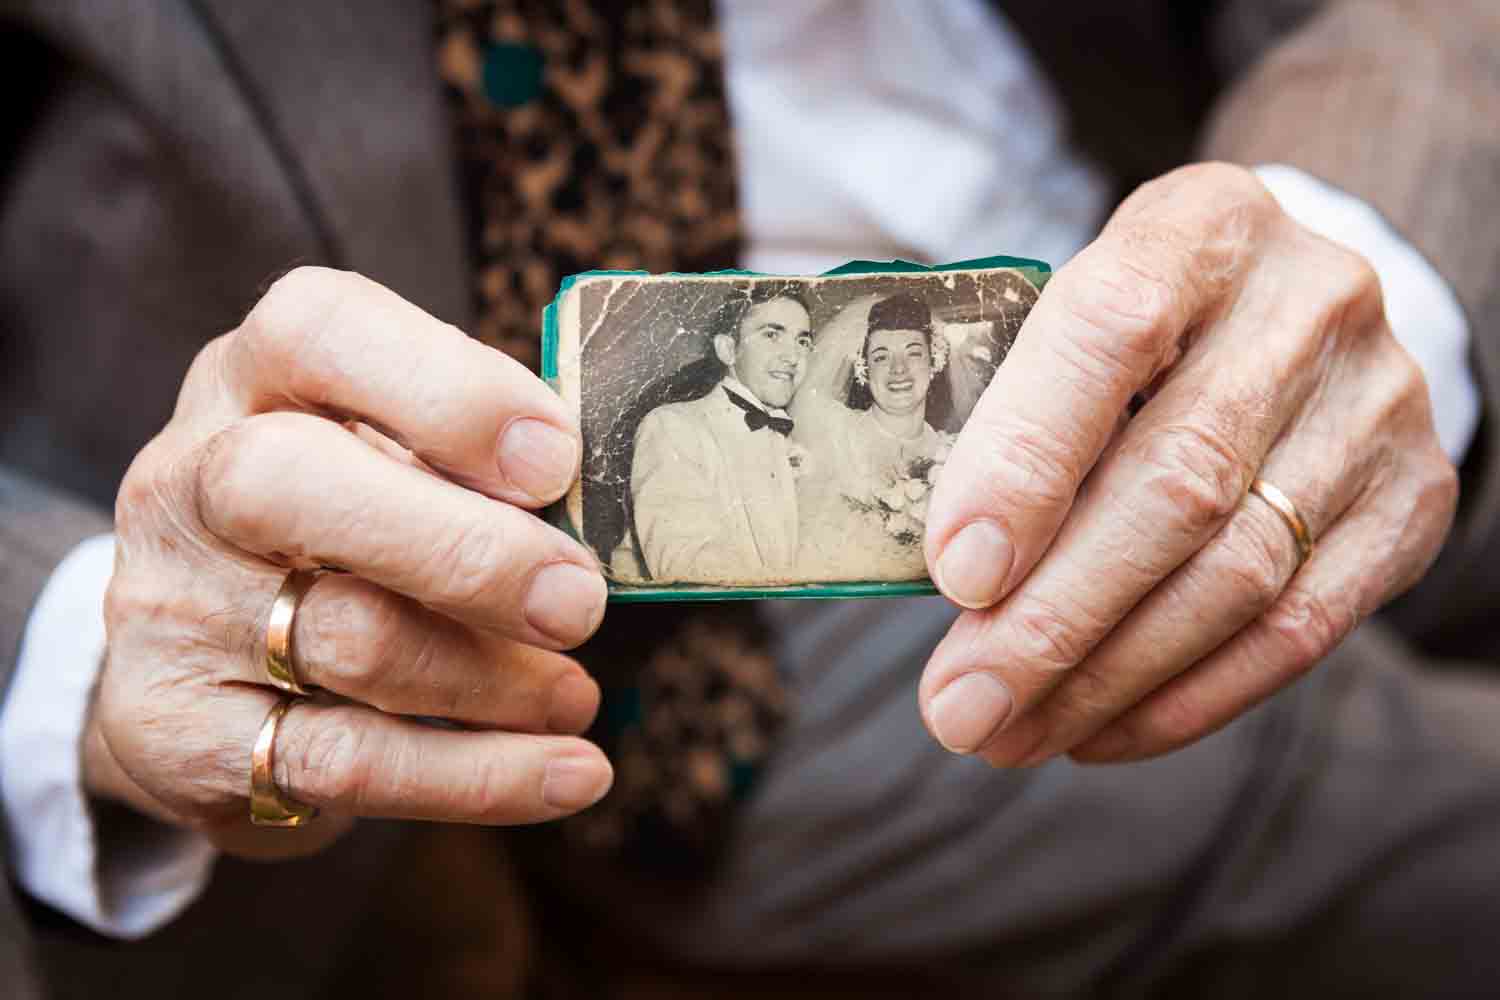 Close up on grandfather's hands holding black and white wedding portrait